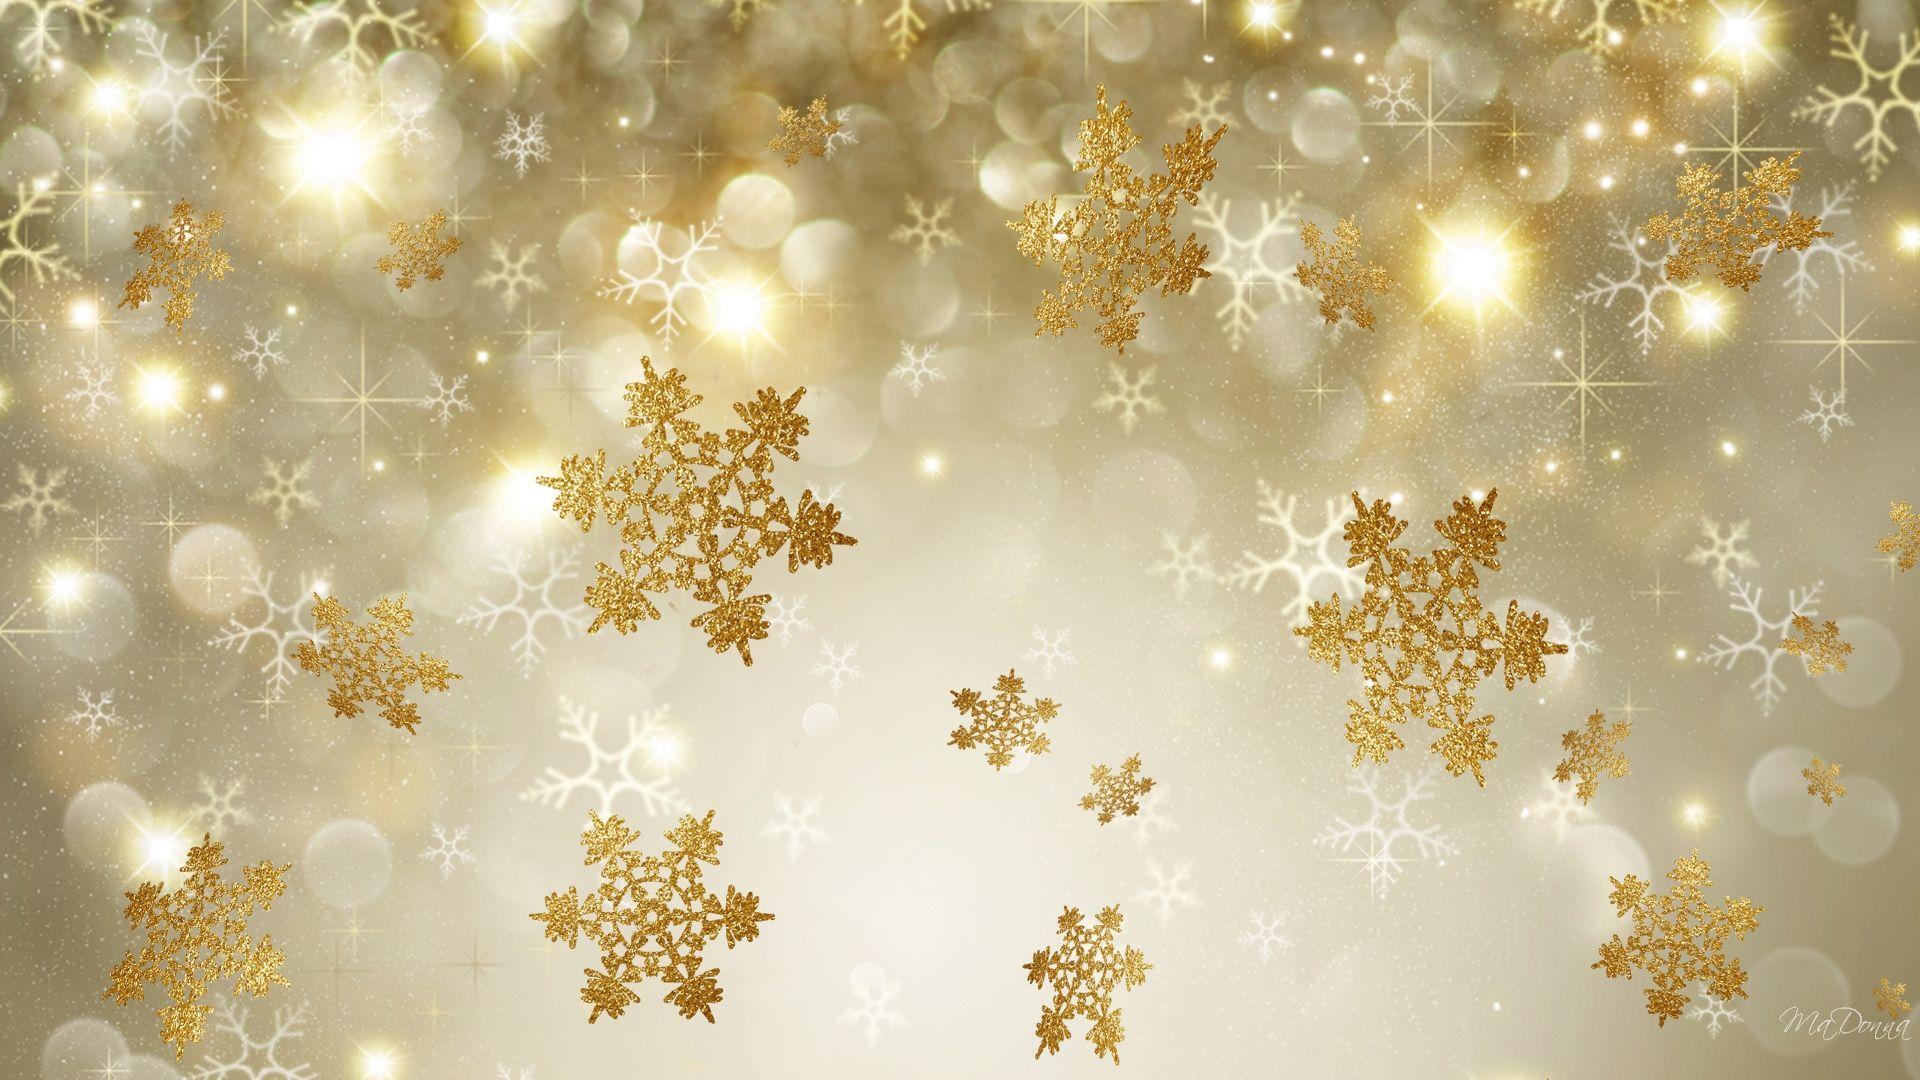 Golden Snowflakes Full HD Wallpaper and Backgroundx1080